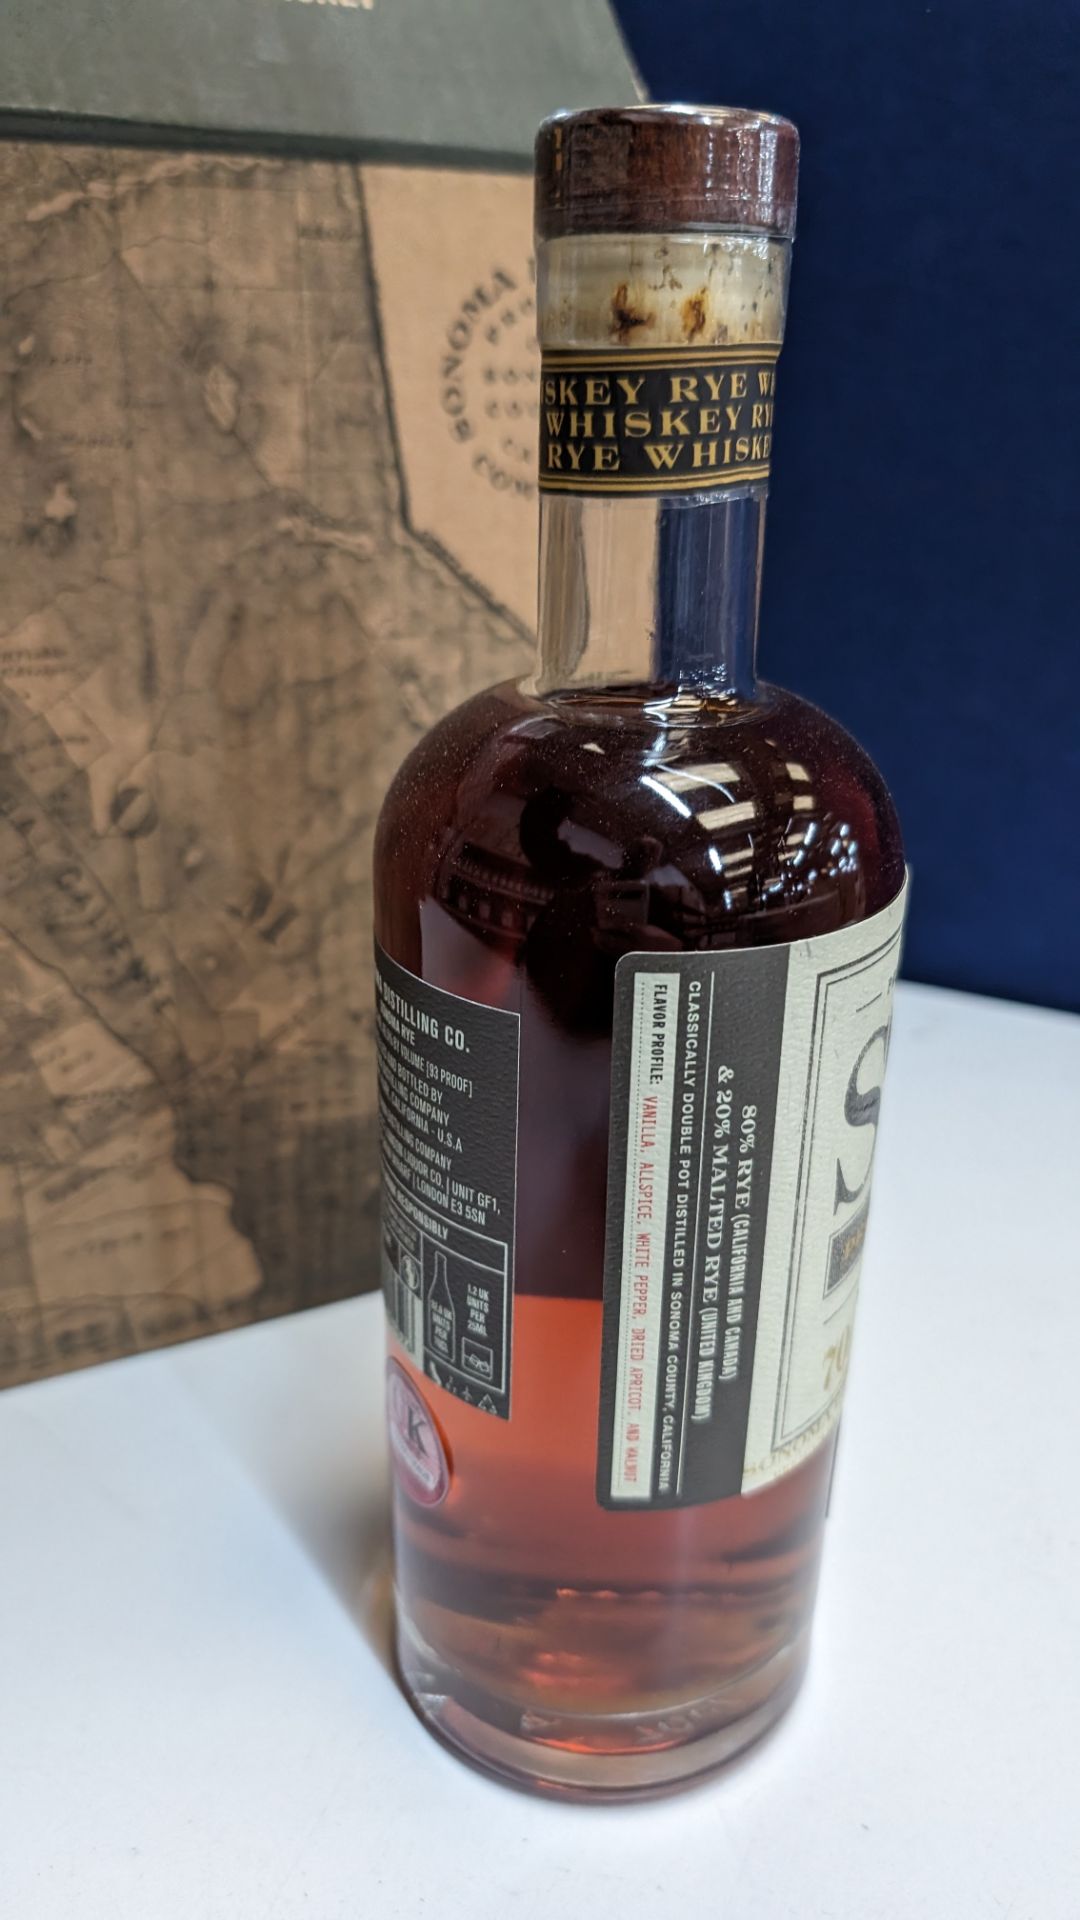 6 off 700ml bottles of Sonoma Rye Whiskey. In Sonoma branded box which includes bottling details on - Image 6 of 8